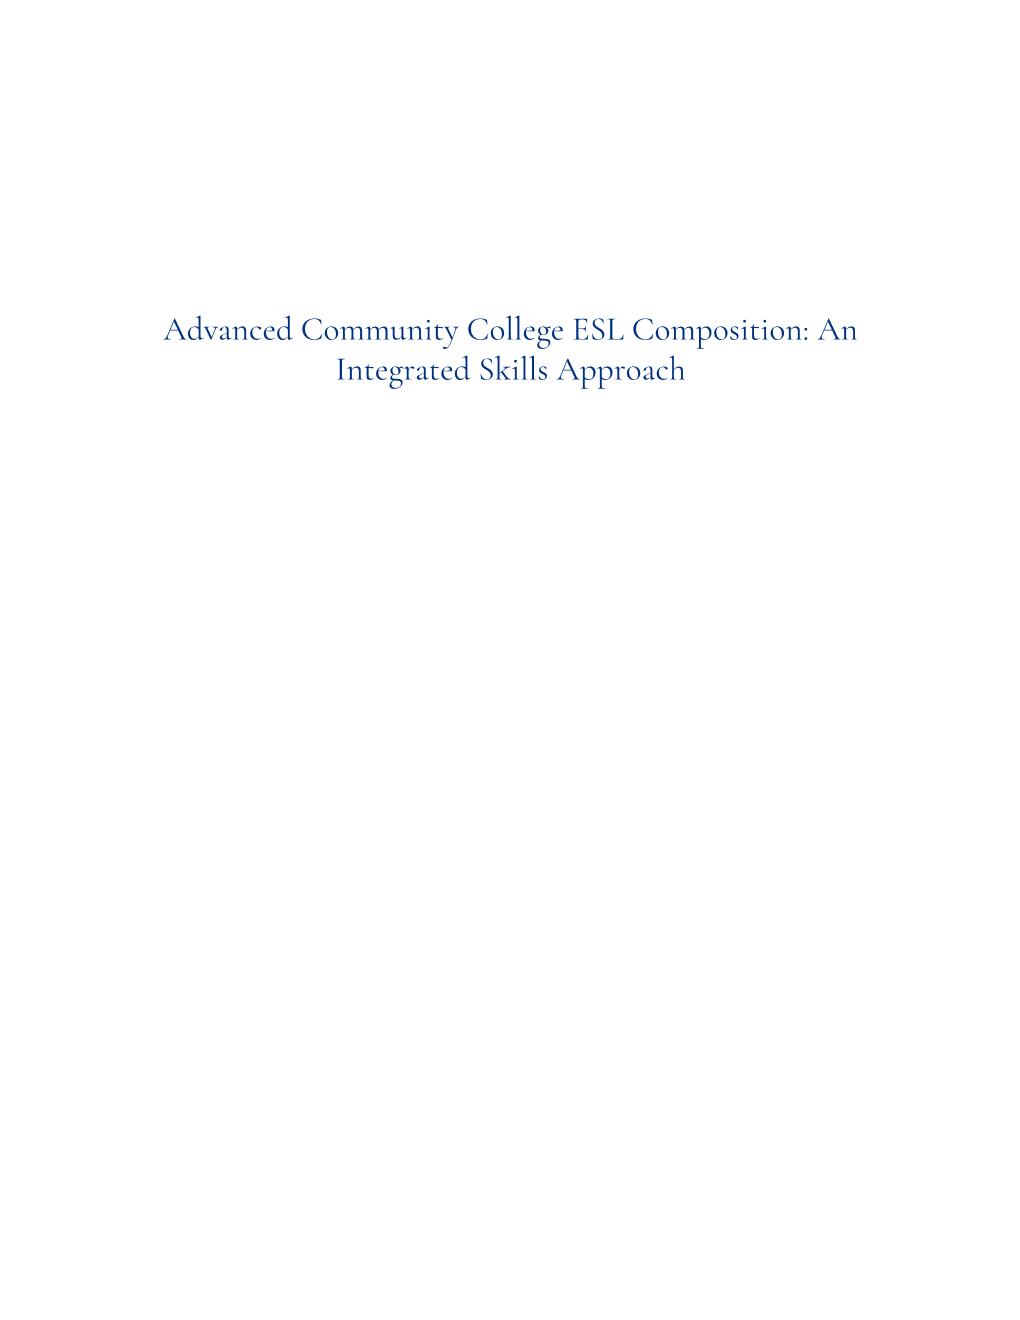 Advanced Community College ESL Composition: an Integrated Skills Approach ADVANCED COMMUNITY COLLEGE ESL COMPOSITION: an INTEGRATED SKILLS APPROACH